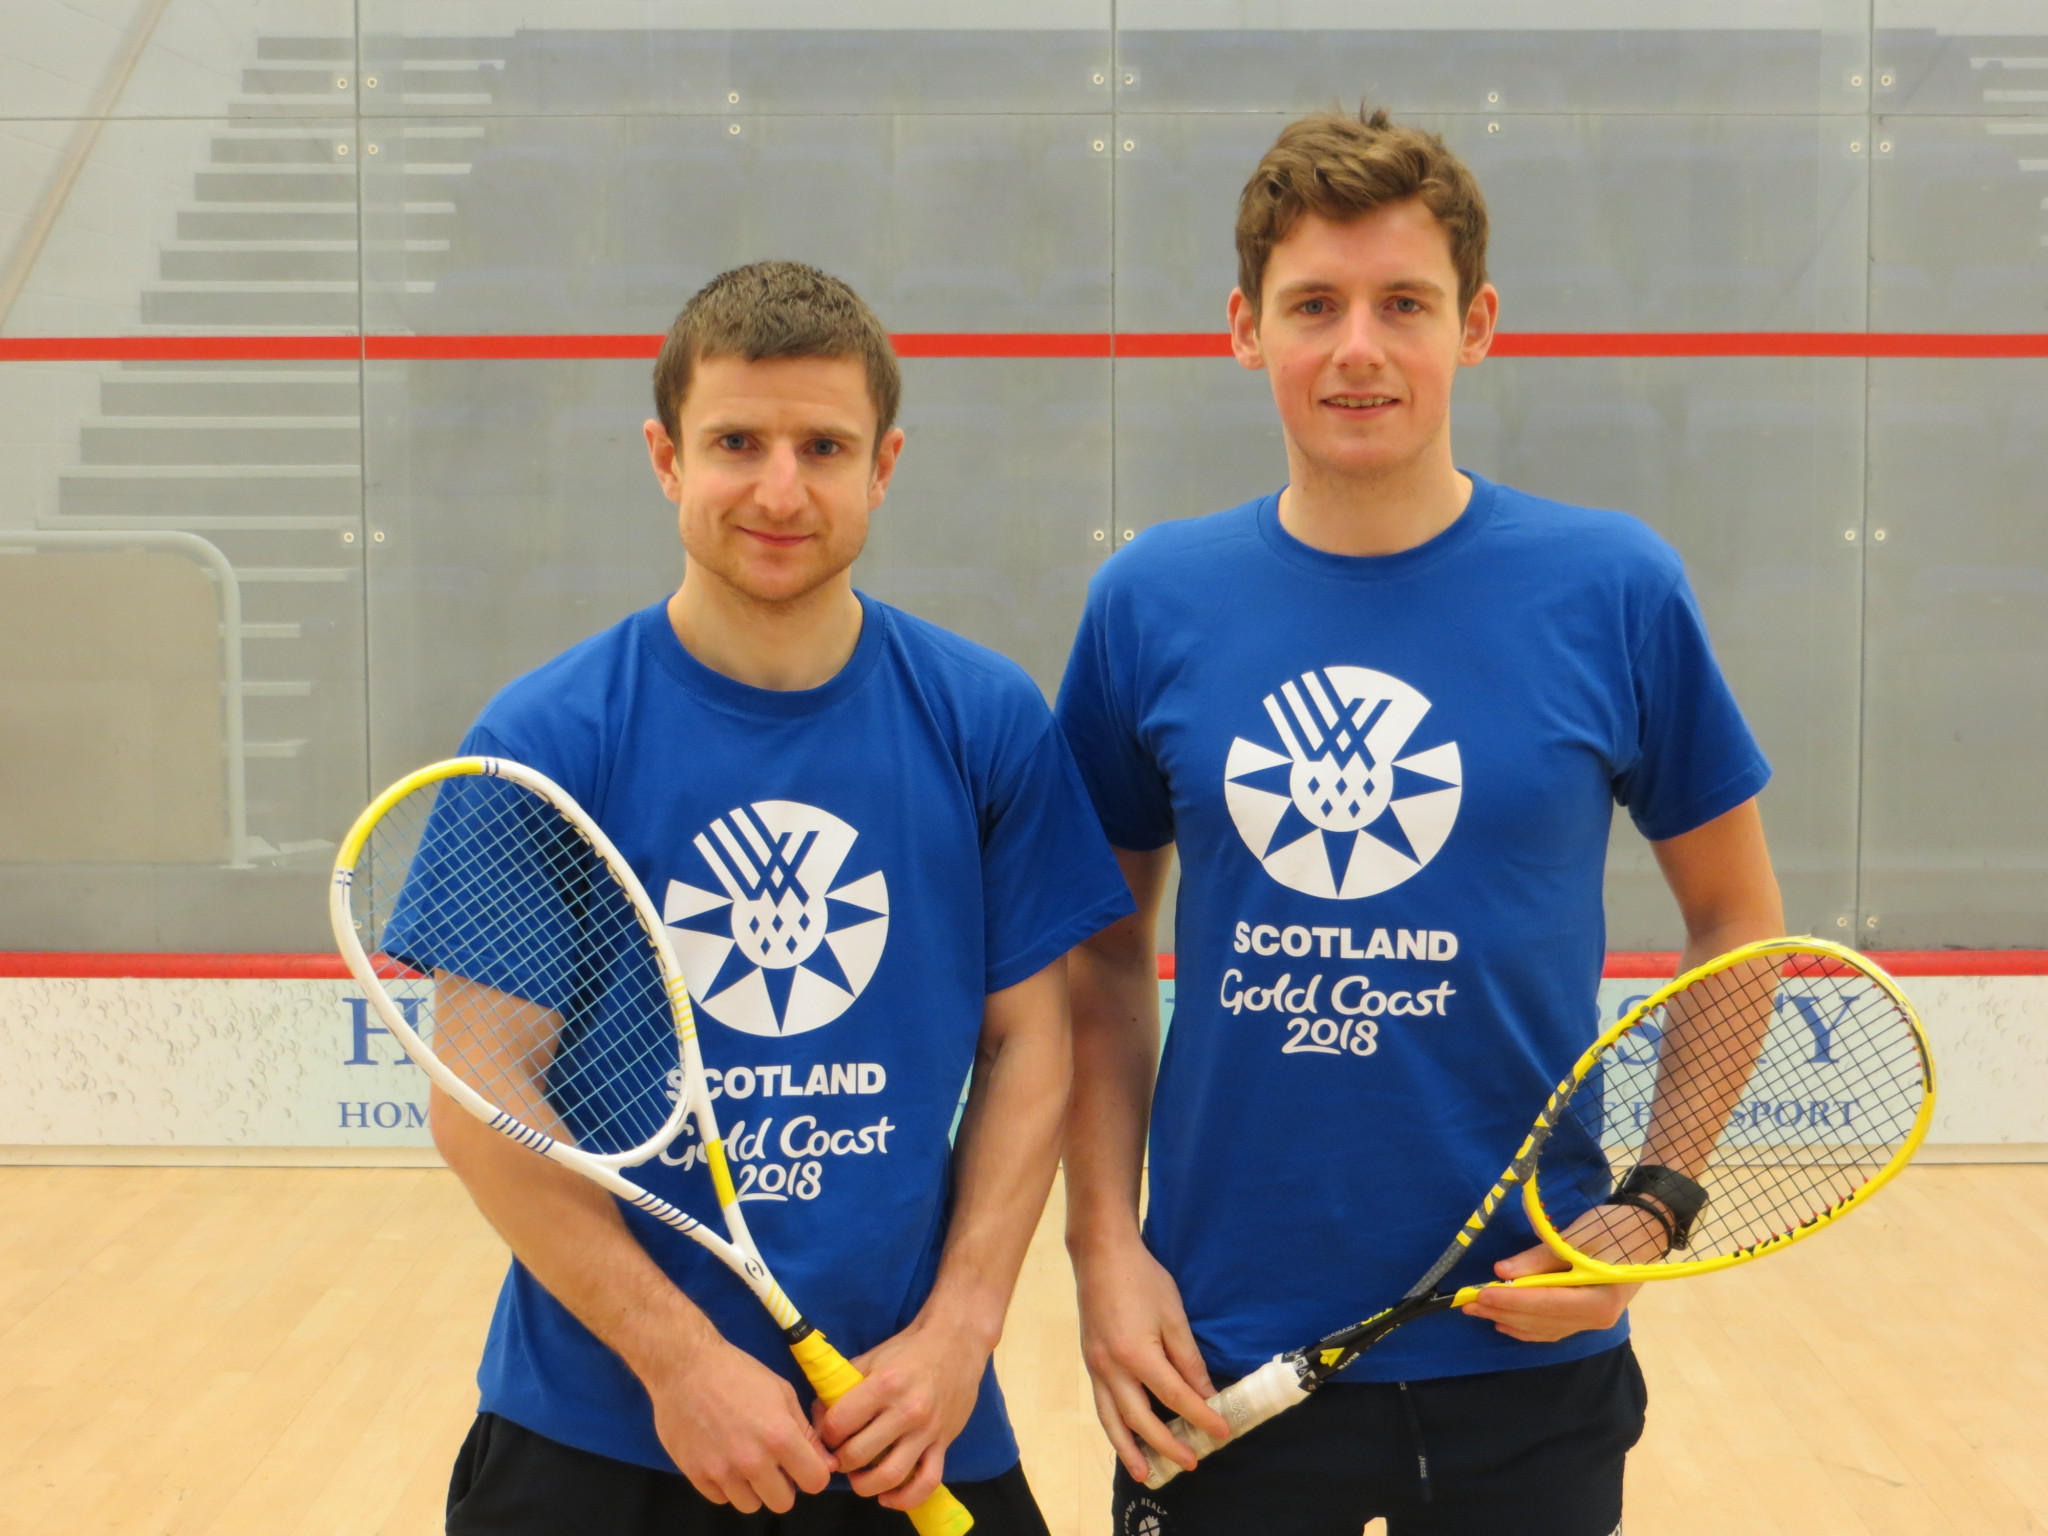 Alan Clyne and Greg Lobban have today been named as the first two squash players selected to compete for Team Scotland at the Gold Coast 2018 Commonwealth Games ©Team Scotland